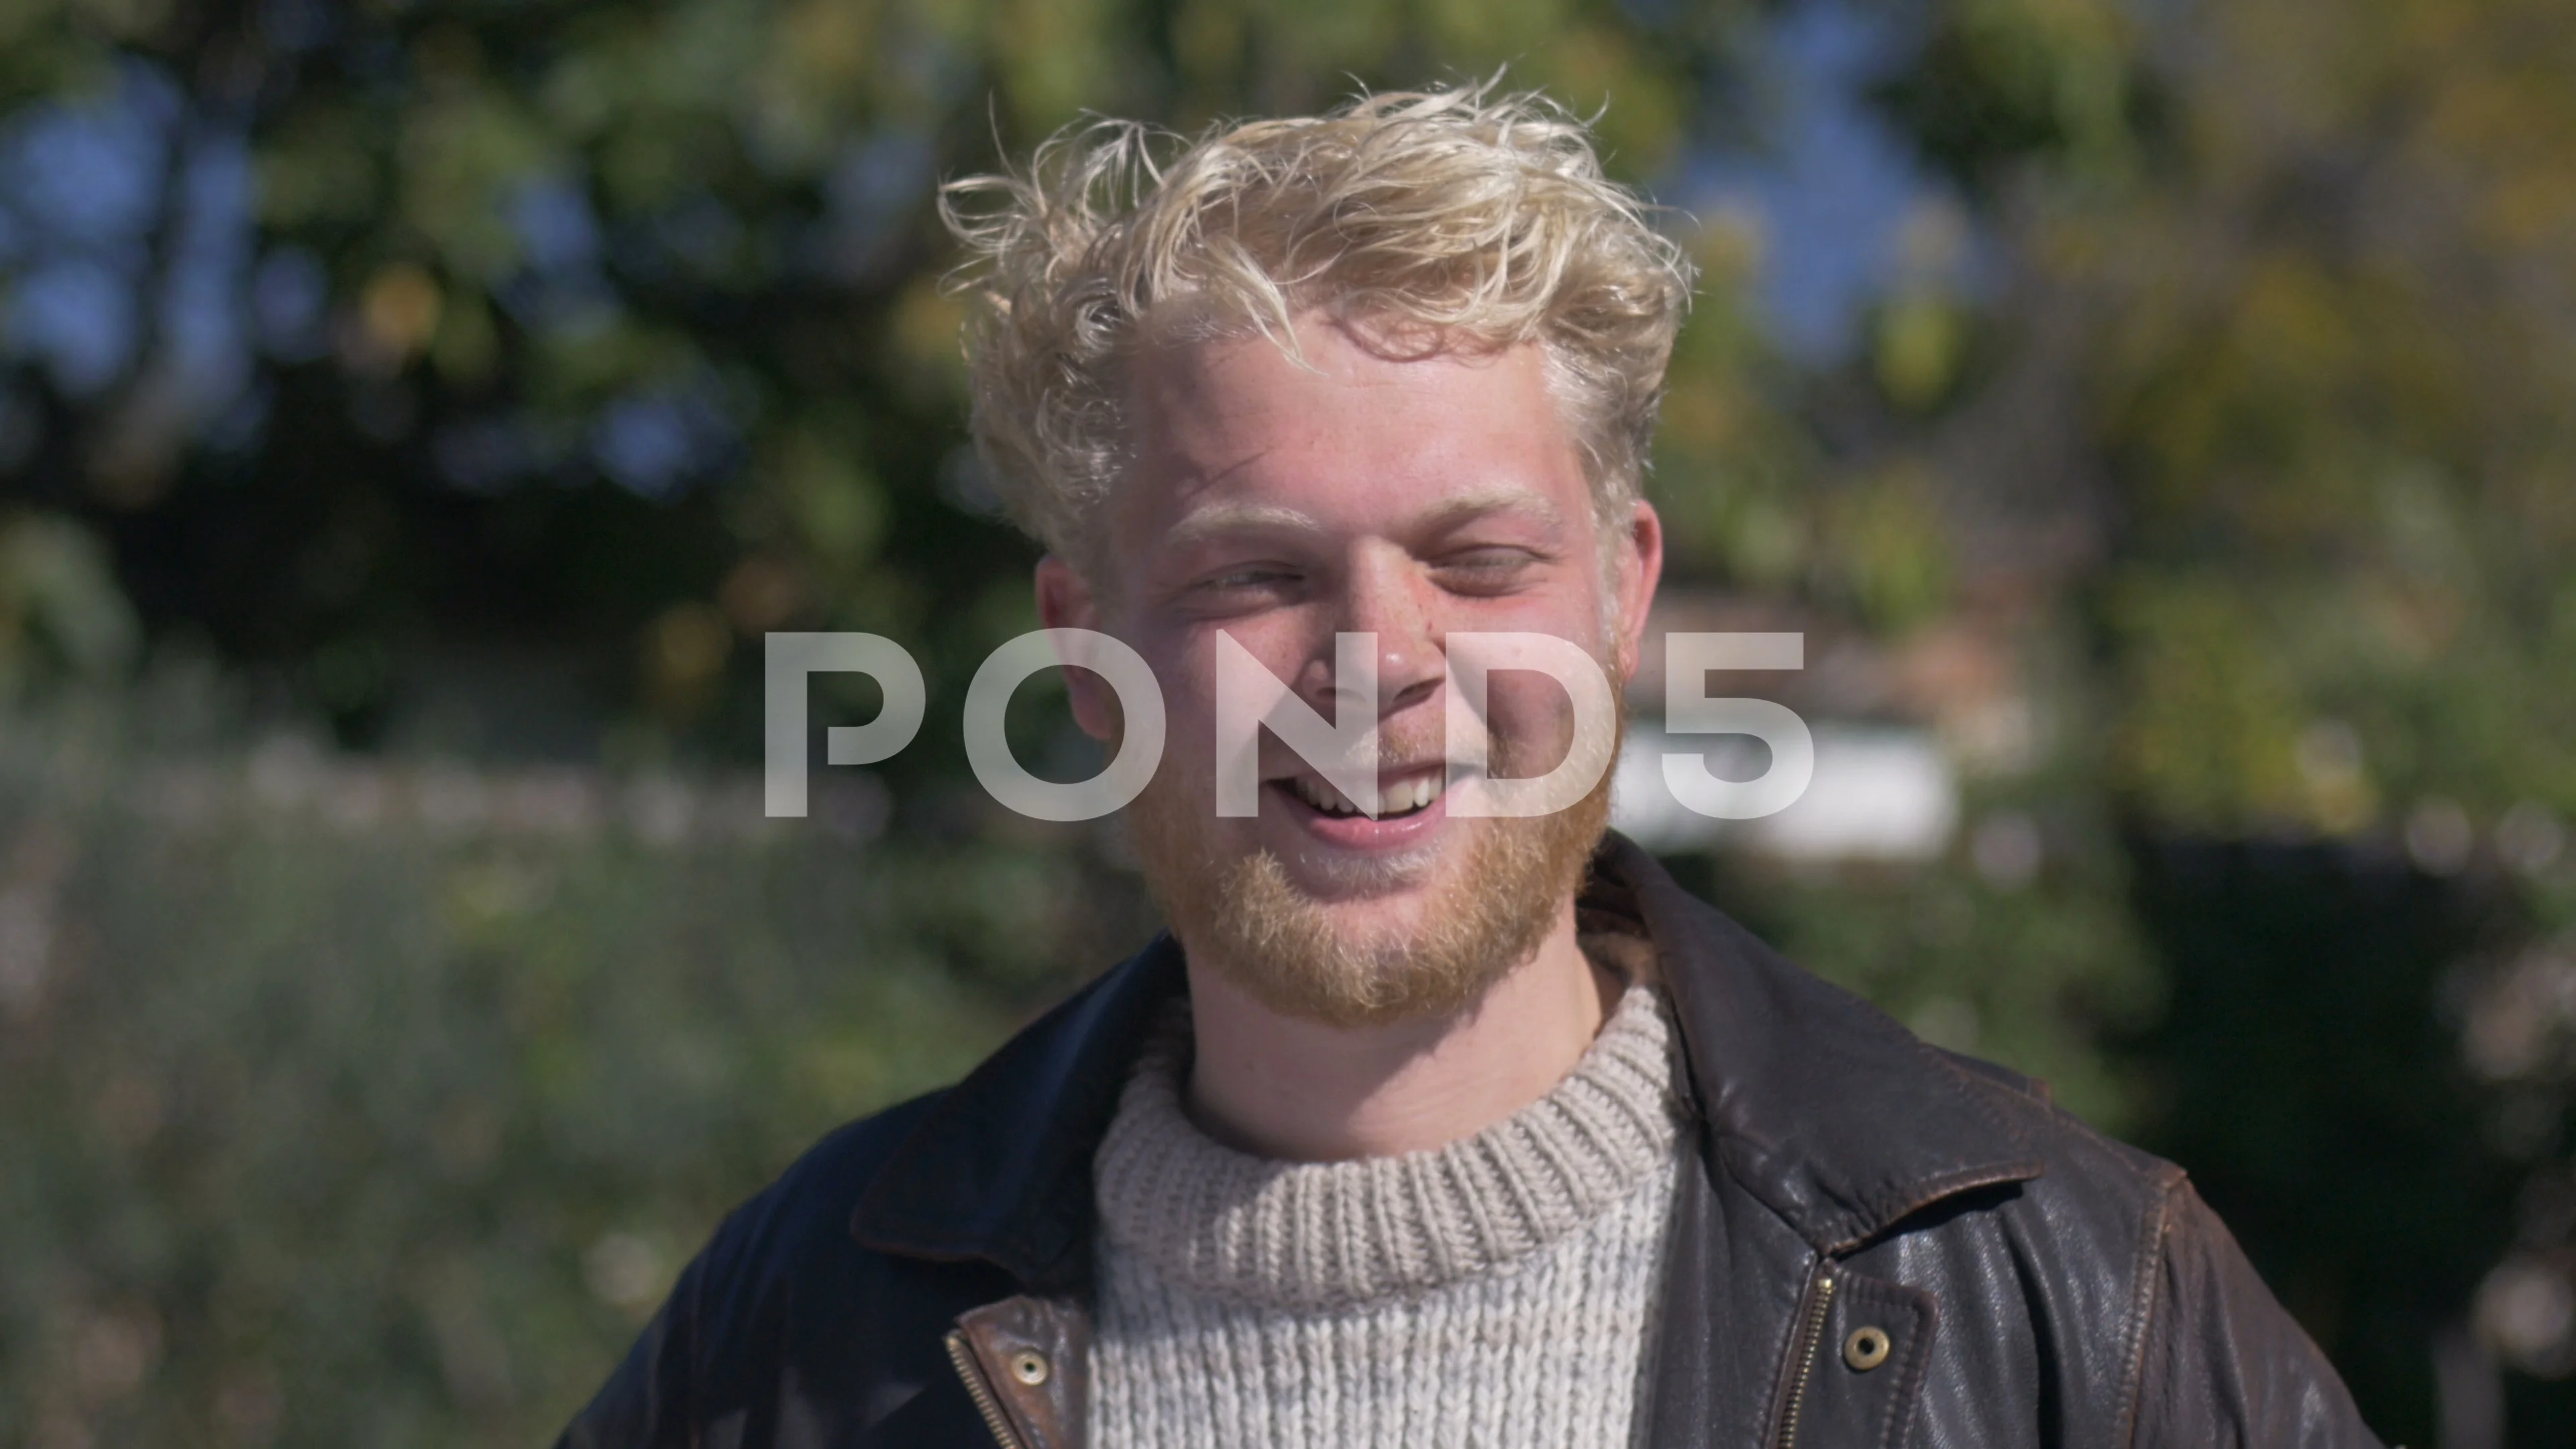 Video A Handsome Blond Haired Millennial Man With A Beard Smiling